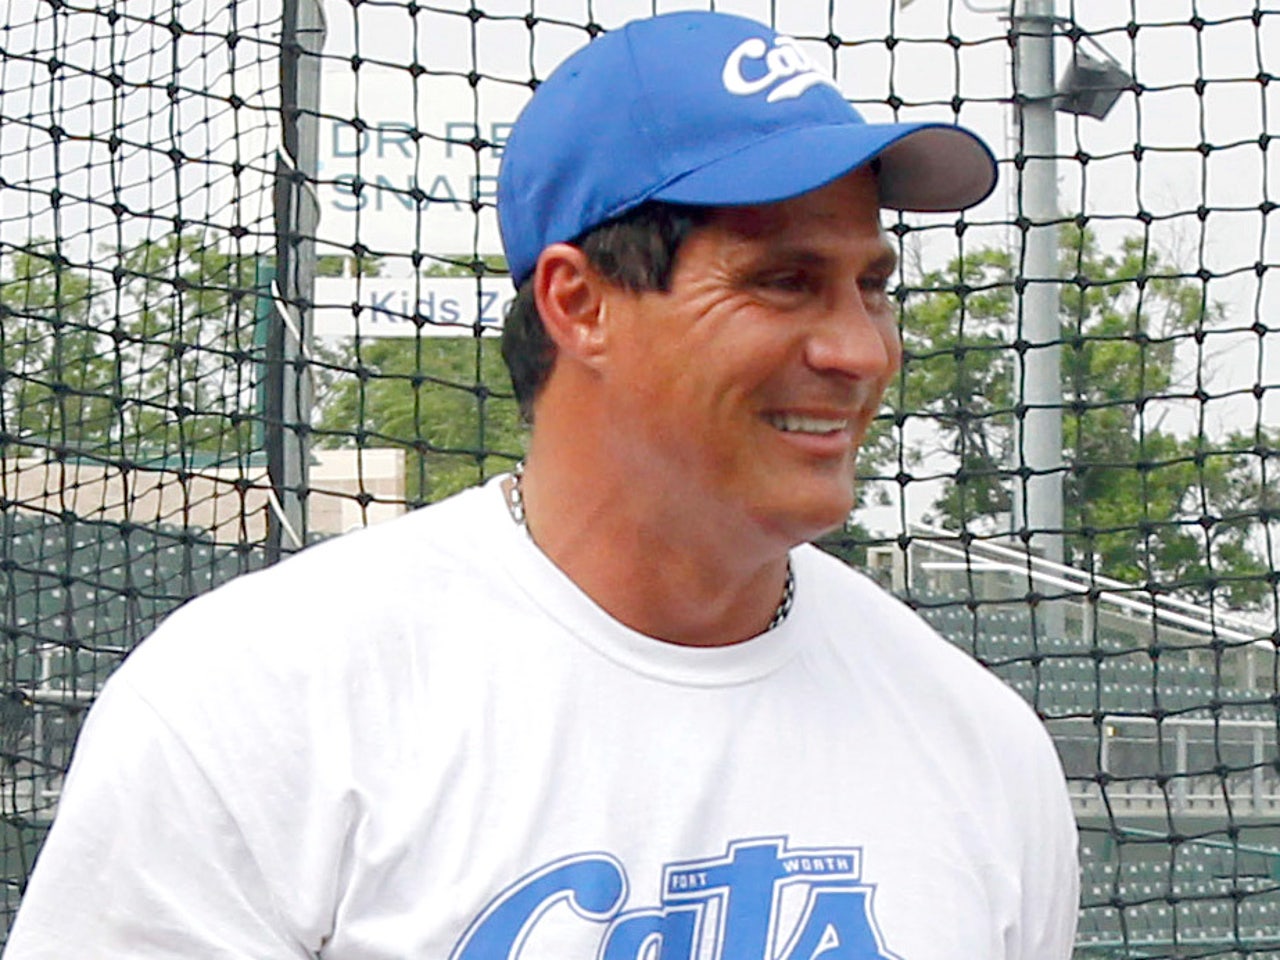 MLS' Jose Canseco has finger fall OFF during poker match after shooting  accident